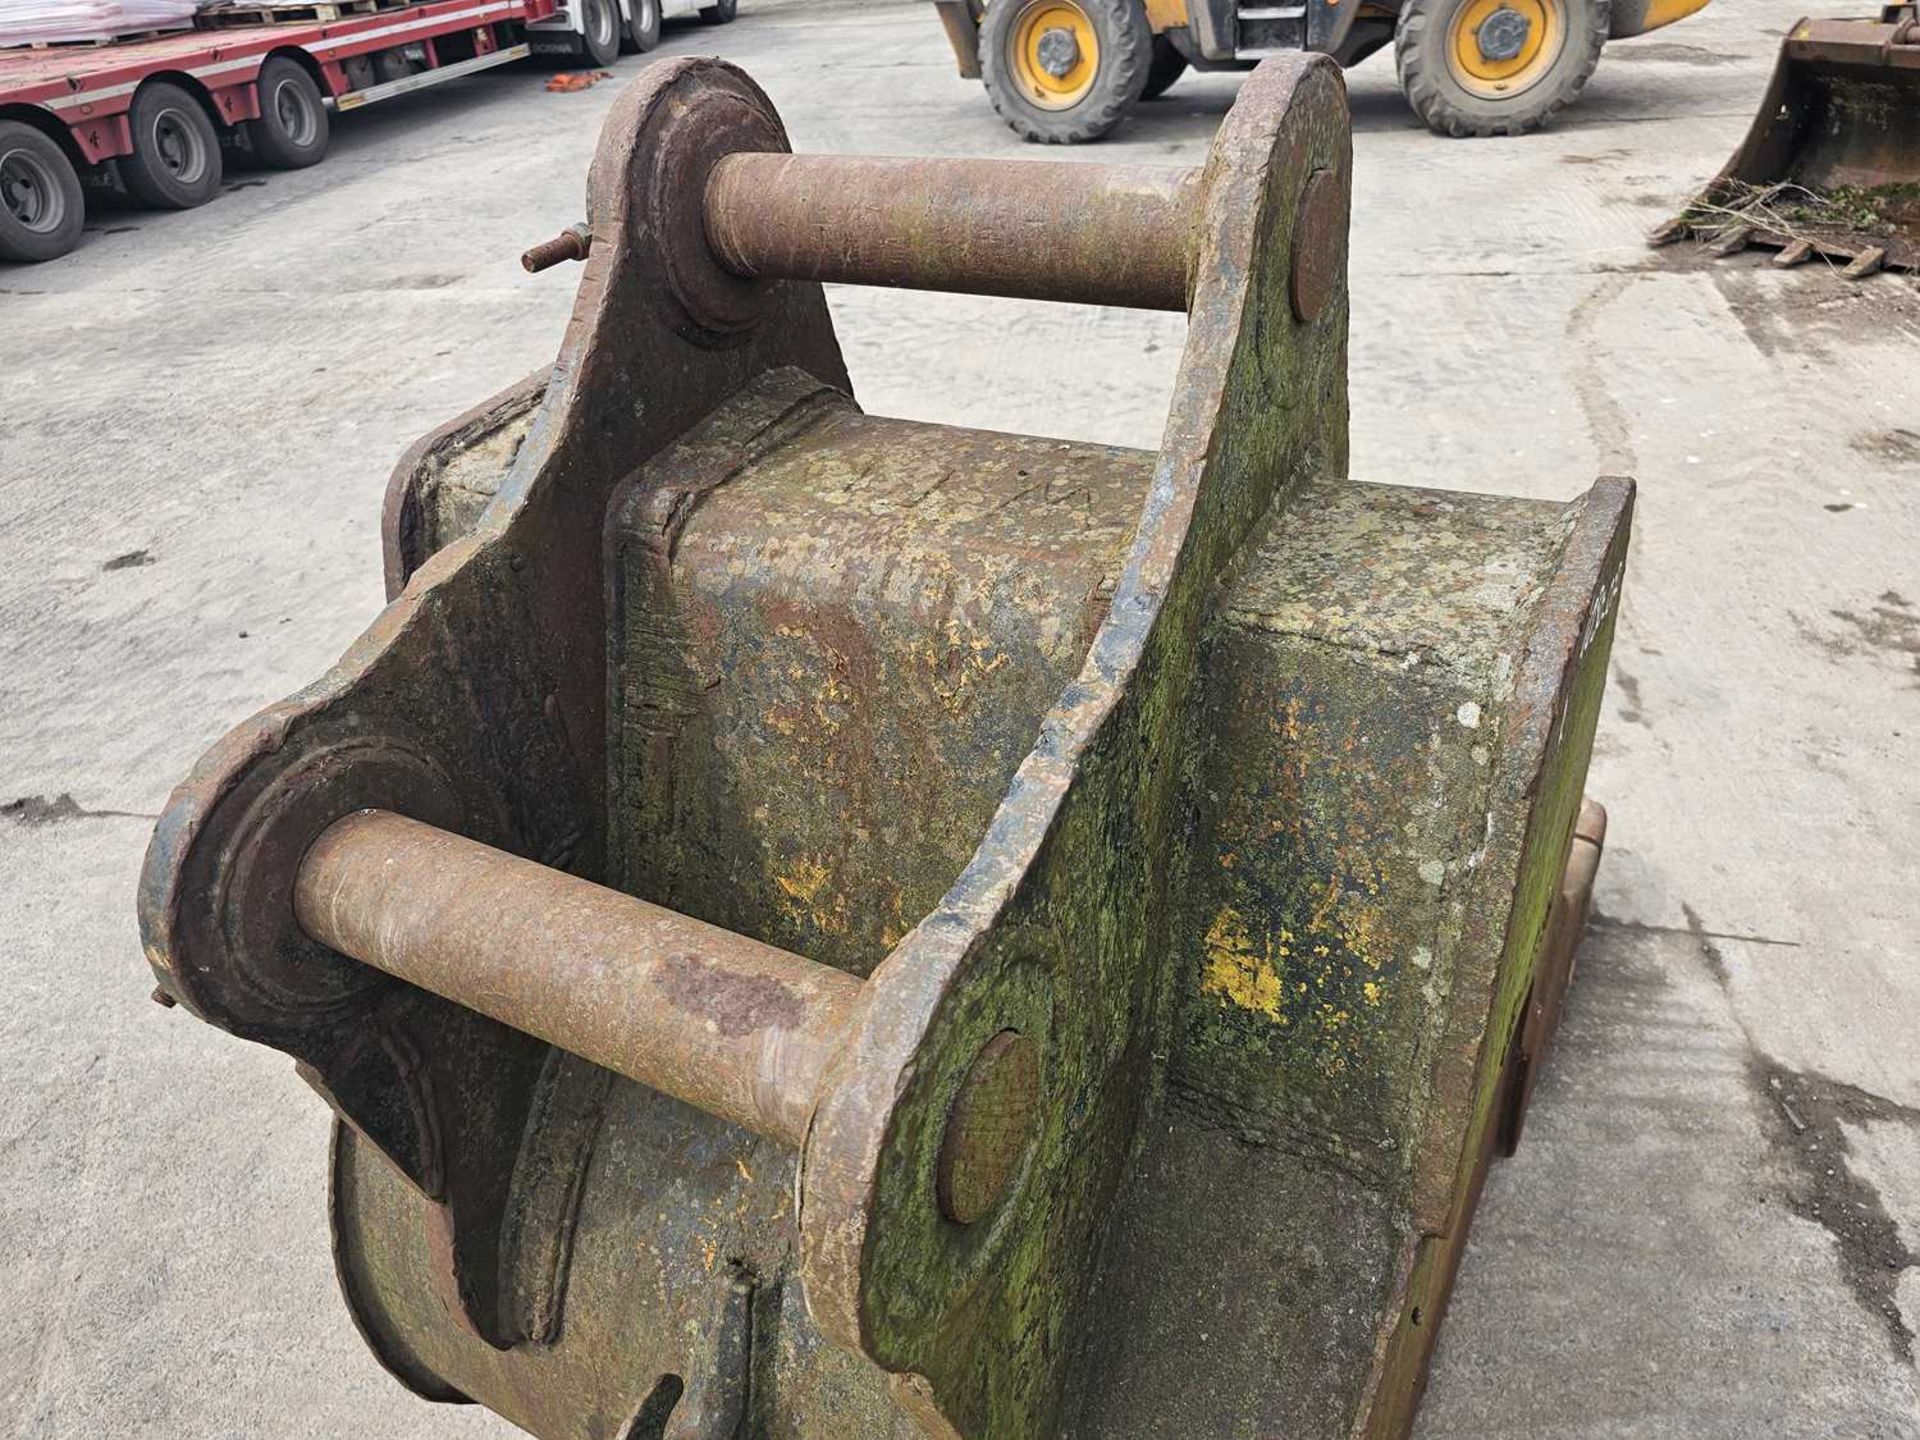 40" Grading Bucket 90mm Pin to suit 30 Ton Excavator - Image 6 of 6